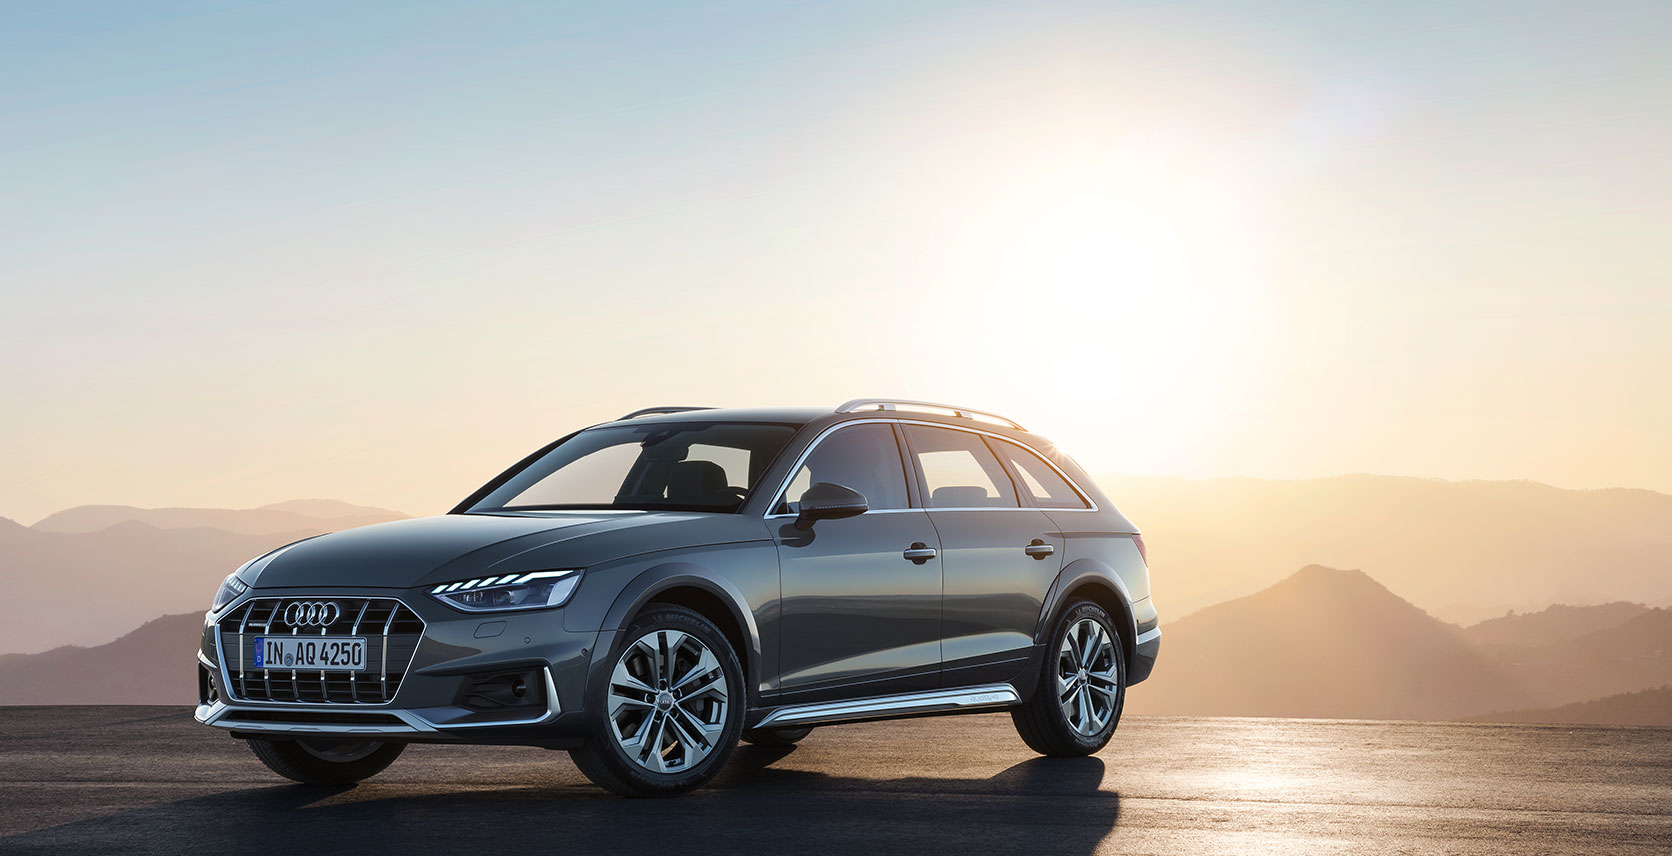 speling Interessant Strippen The New Audi A4 Allroad Is the Station Wagon We've All Been Dreaming Of -  Sharp Magazine